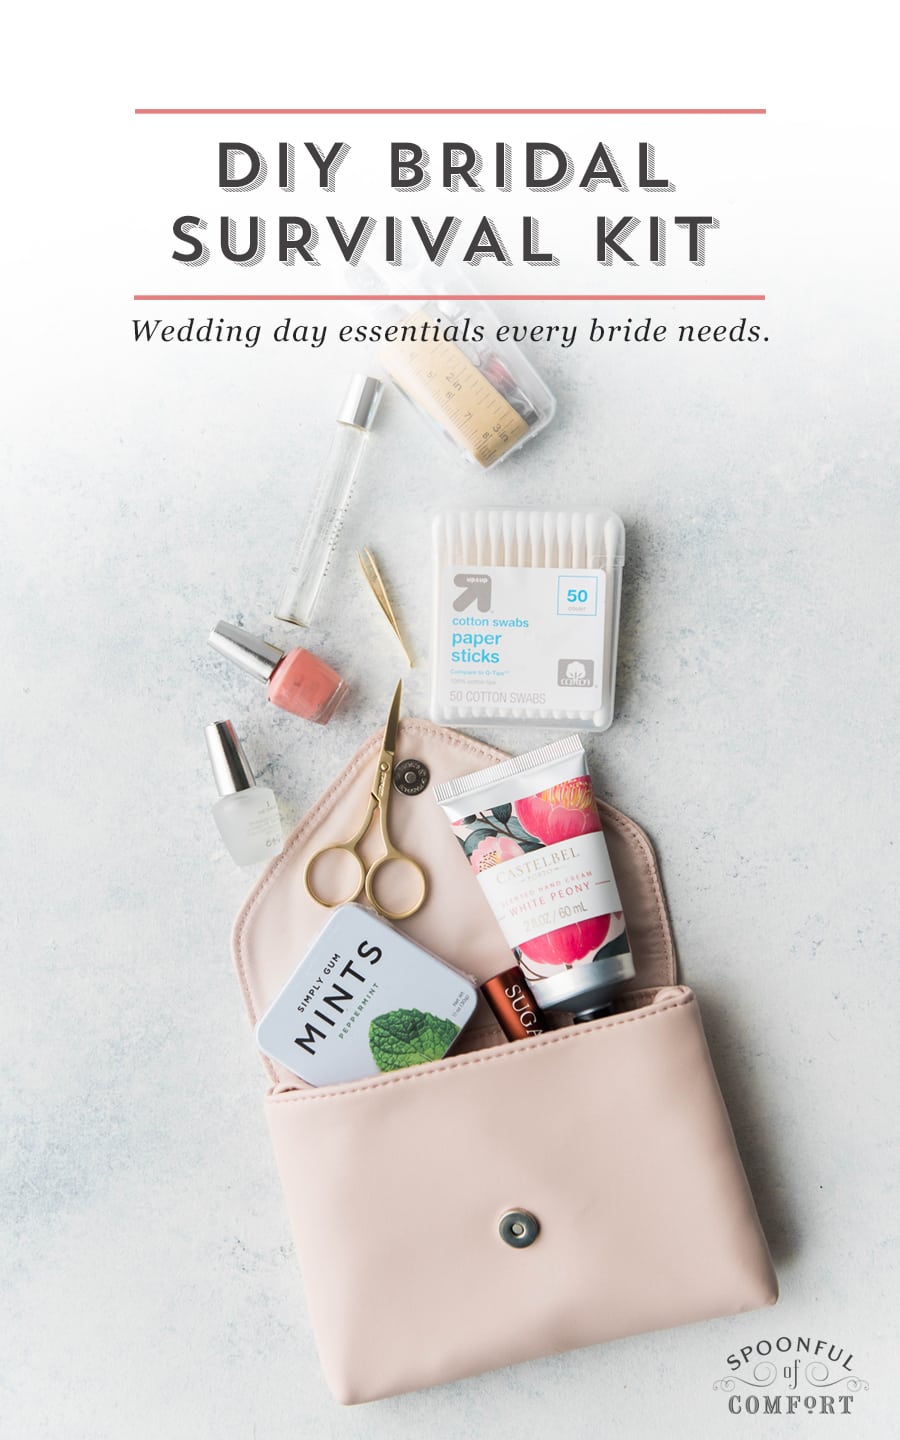 DIY Bridal Survival Kit| Thrilled to see a best friend walk down the aisle? She’s probably pretty excited too, which means there may be a few essentials she forgets the morning of the big day. Here’s where you come in: ever the thoughtful gifter, you arrive prepared with a pretty bag full of the wedding day essentials every bride needs to keep her big day joyful and completely stress-free.